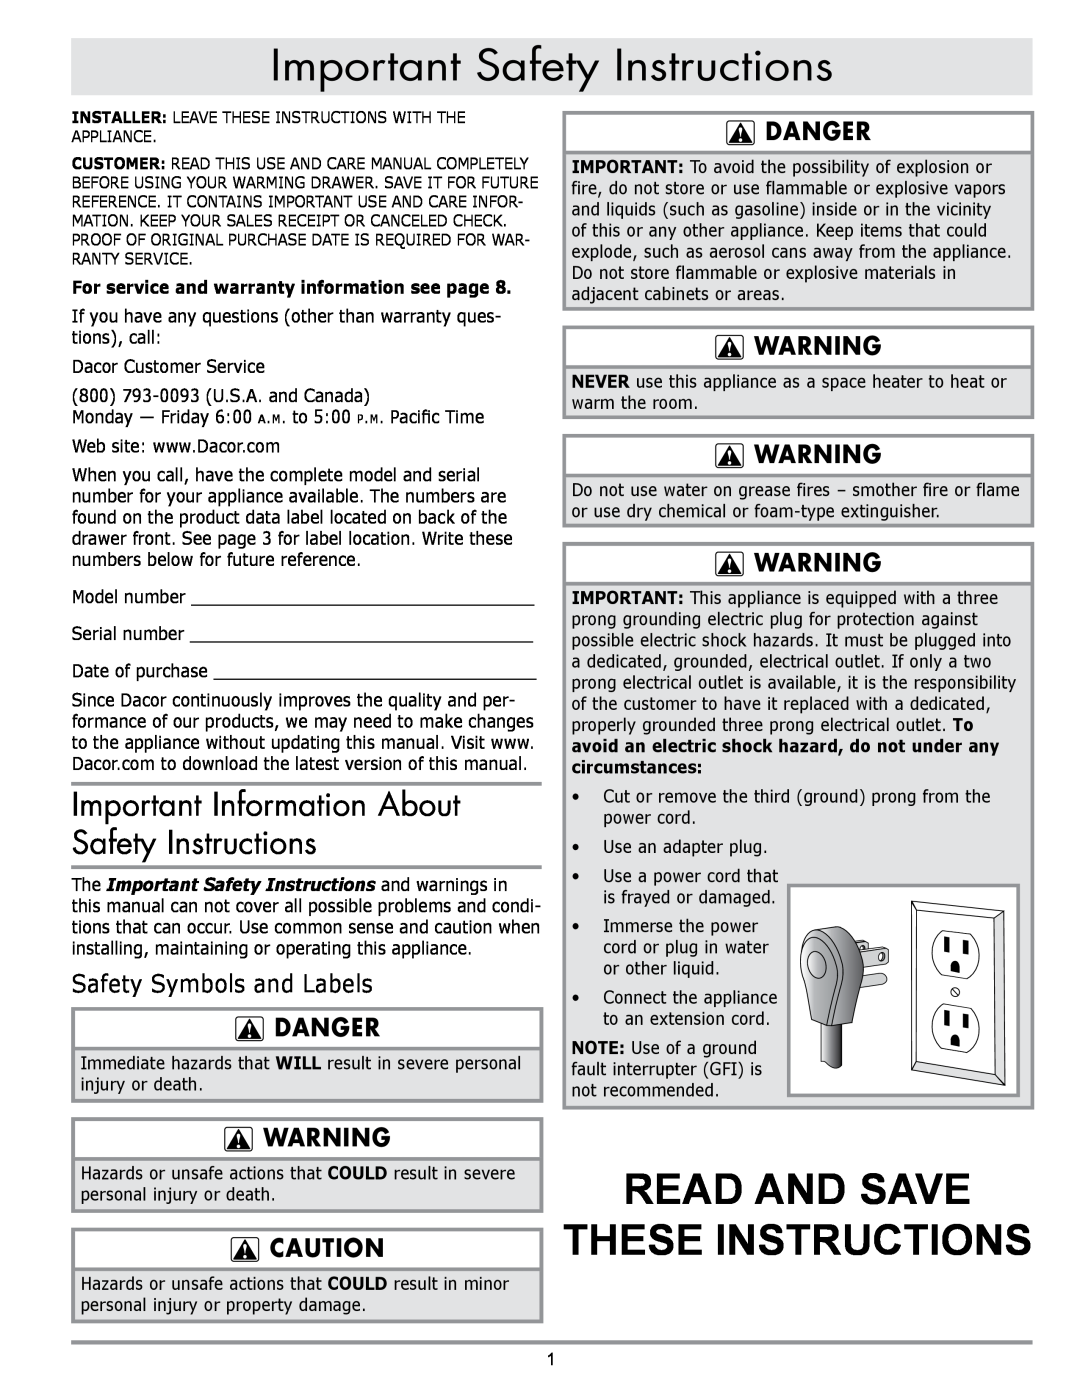 Dacor ERWD30 manual Important Safety Instructions, Read And Save These Instructions, Safety Symbols and Labels, danger 